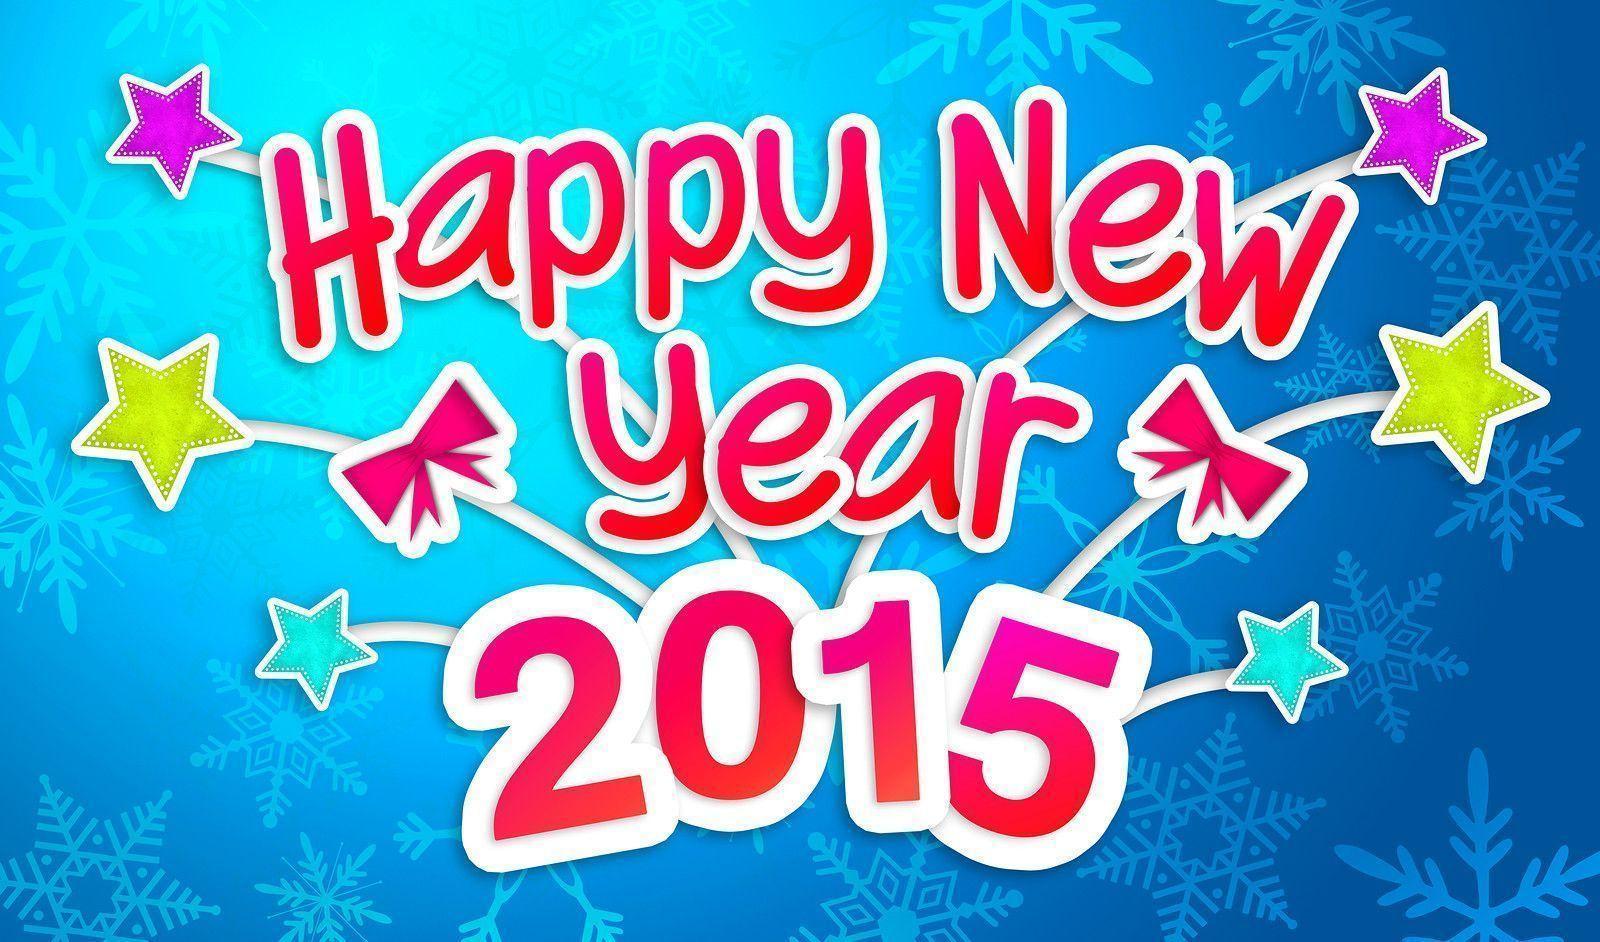 New Year Messages, sms, Quotes, pics, picture. Happy New Year 2015